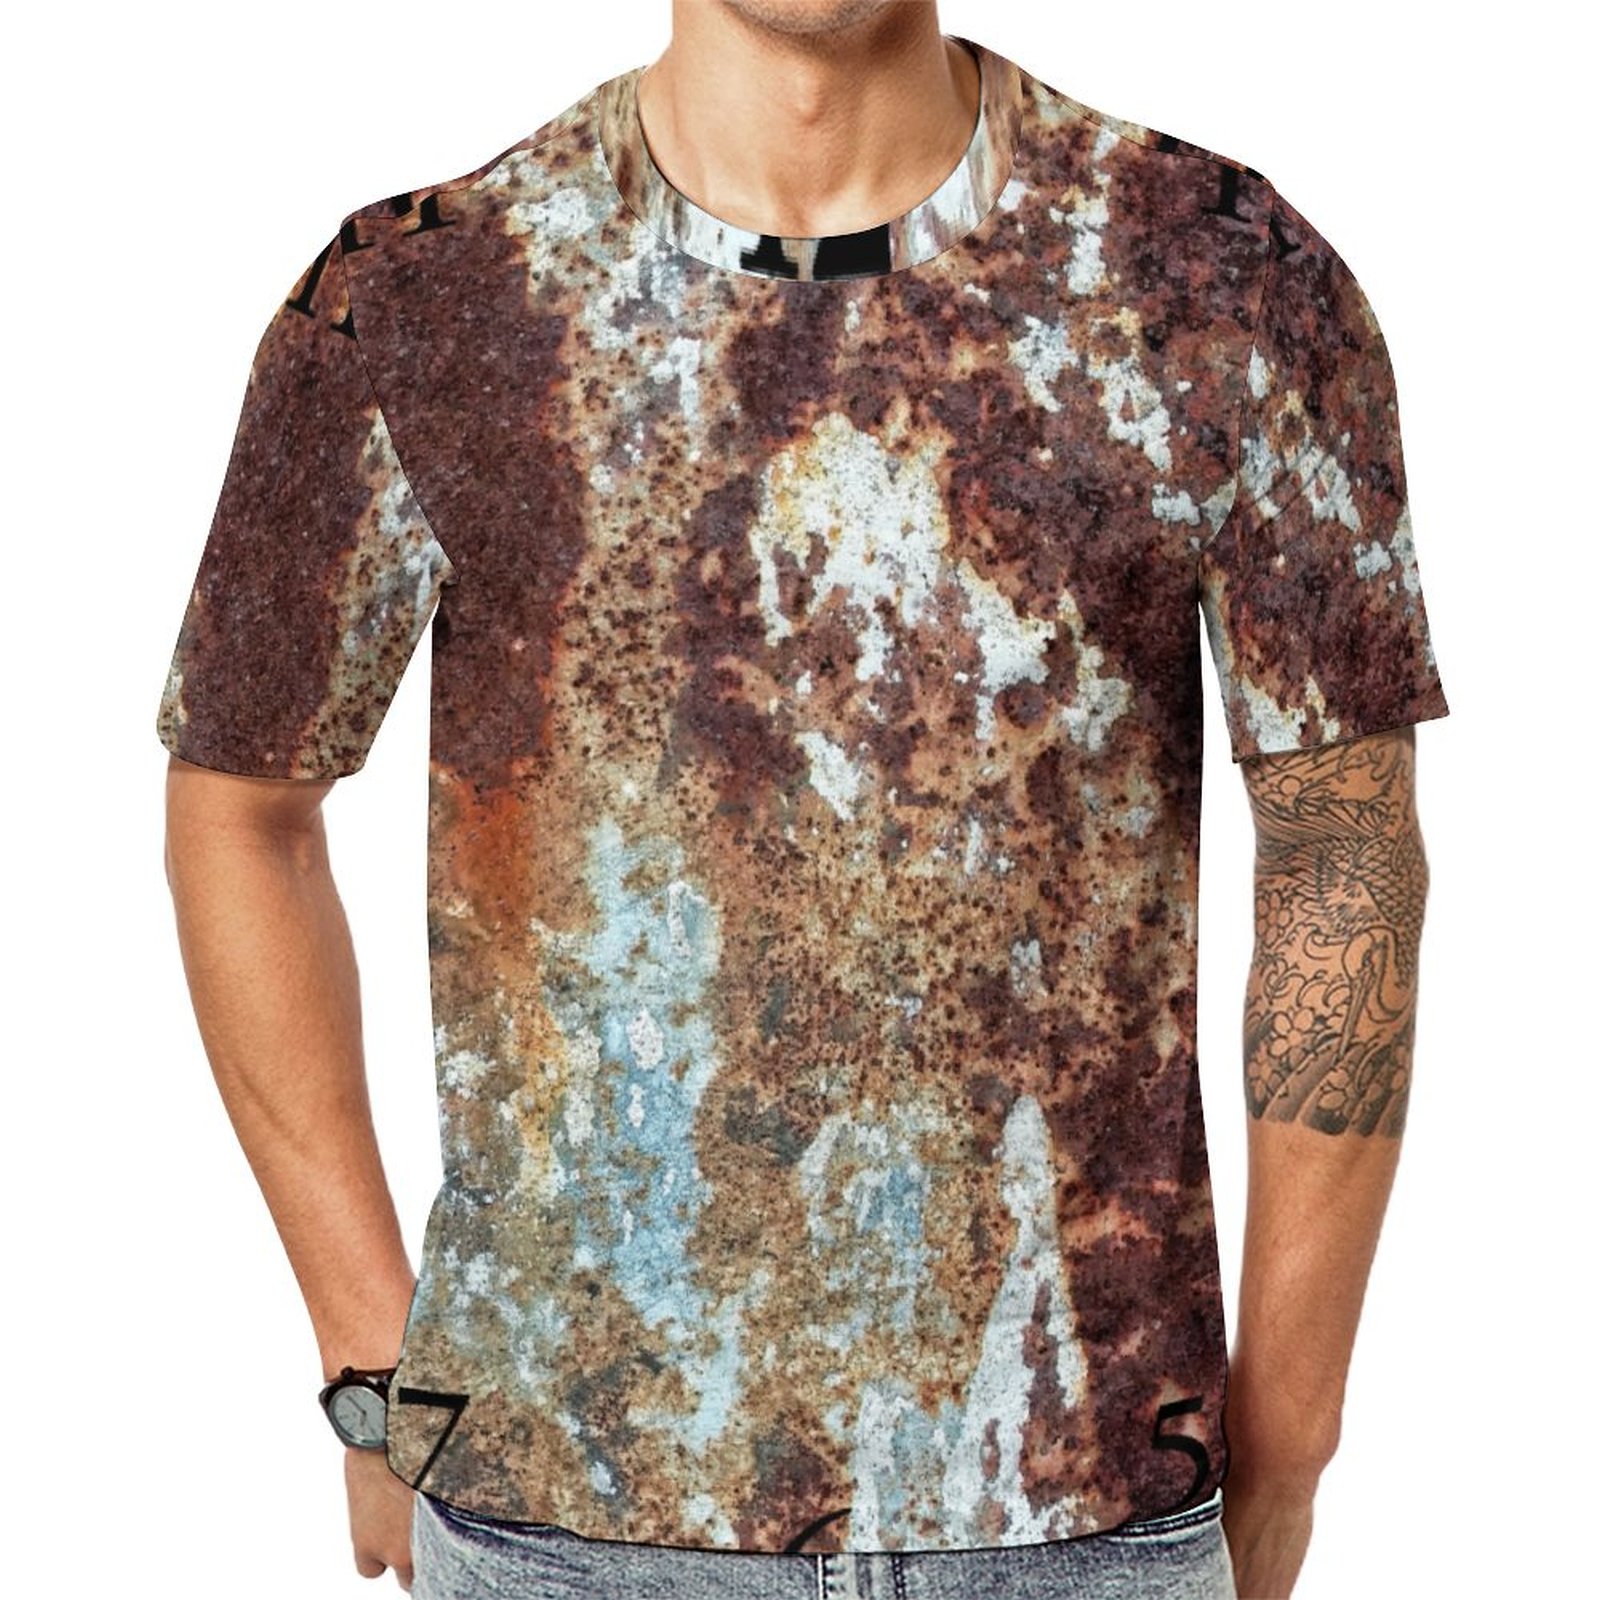 Heavily Rusted Metal Short Sleeve Print Unisex Tshirt Summer Casual Tees for Men and Women Coolcoshirts